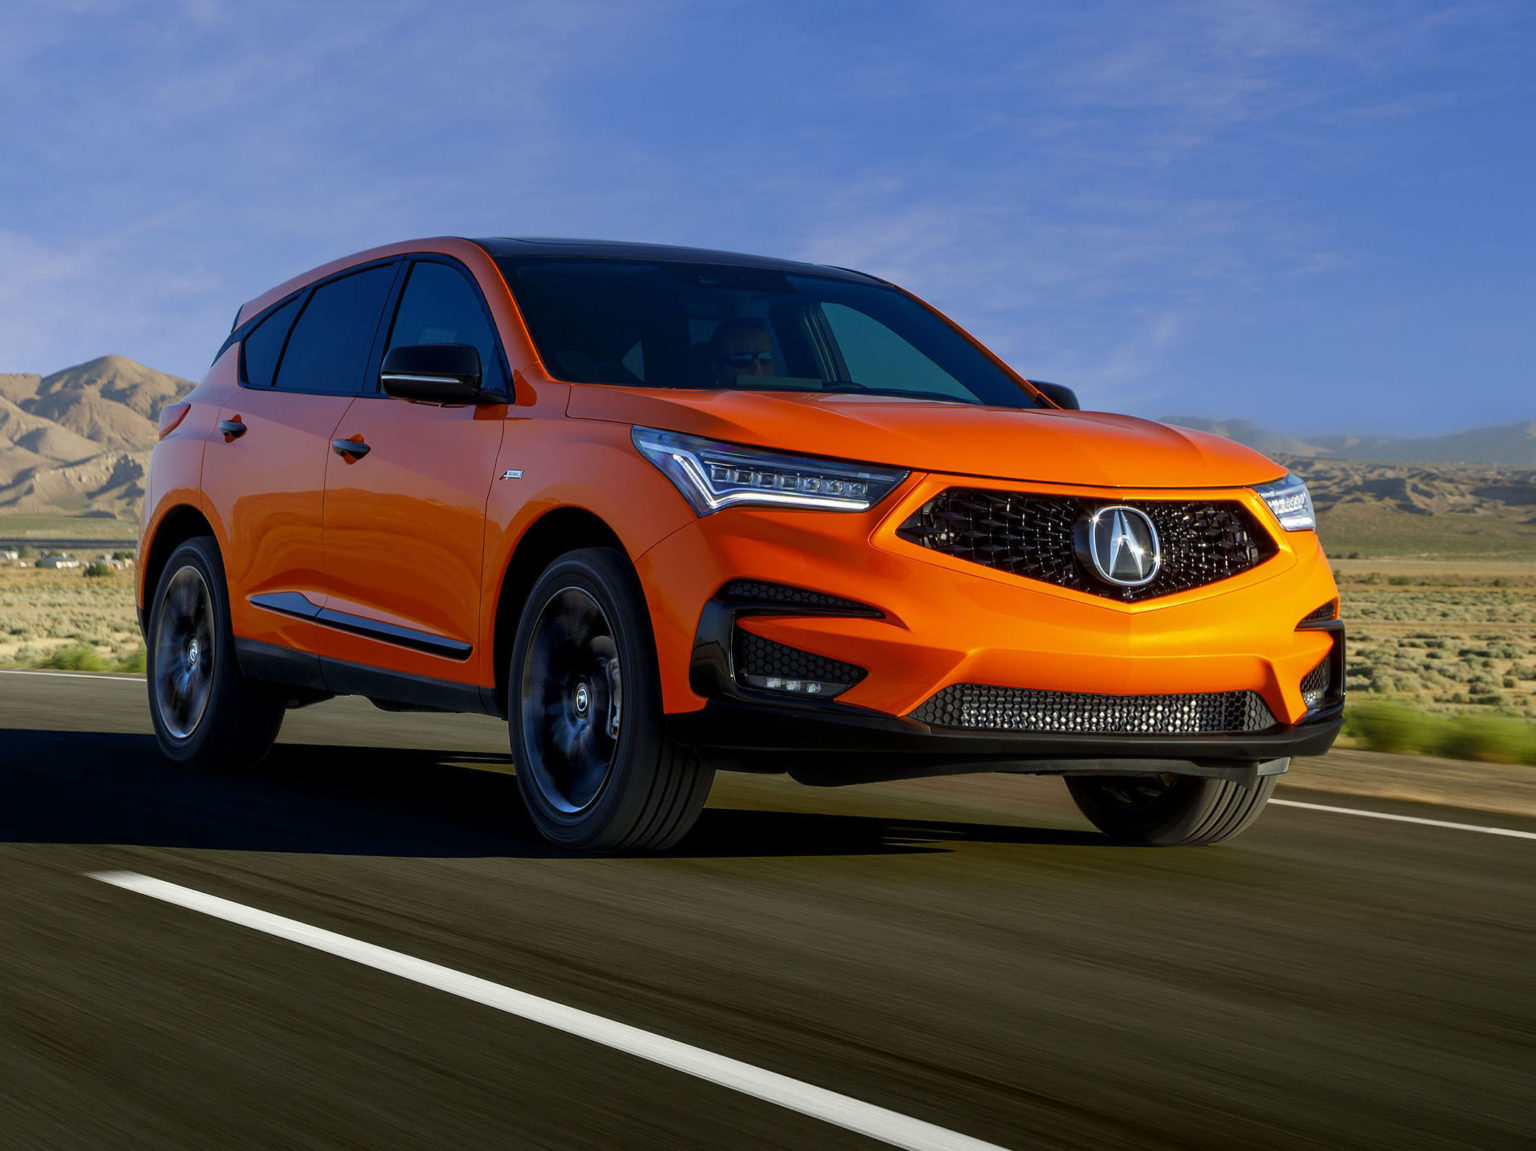 The 2021 Acura RDX PMC Edition features a thermal orange paint job that it shares with the Acura NSX.